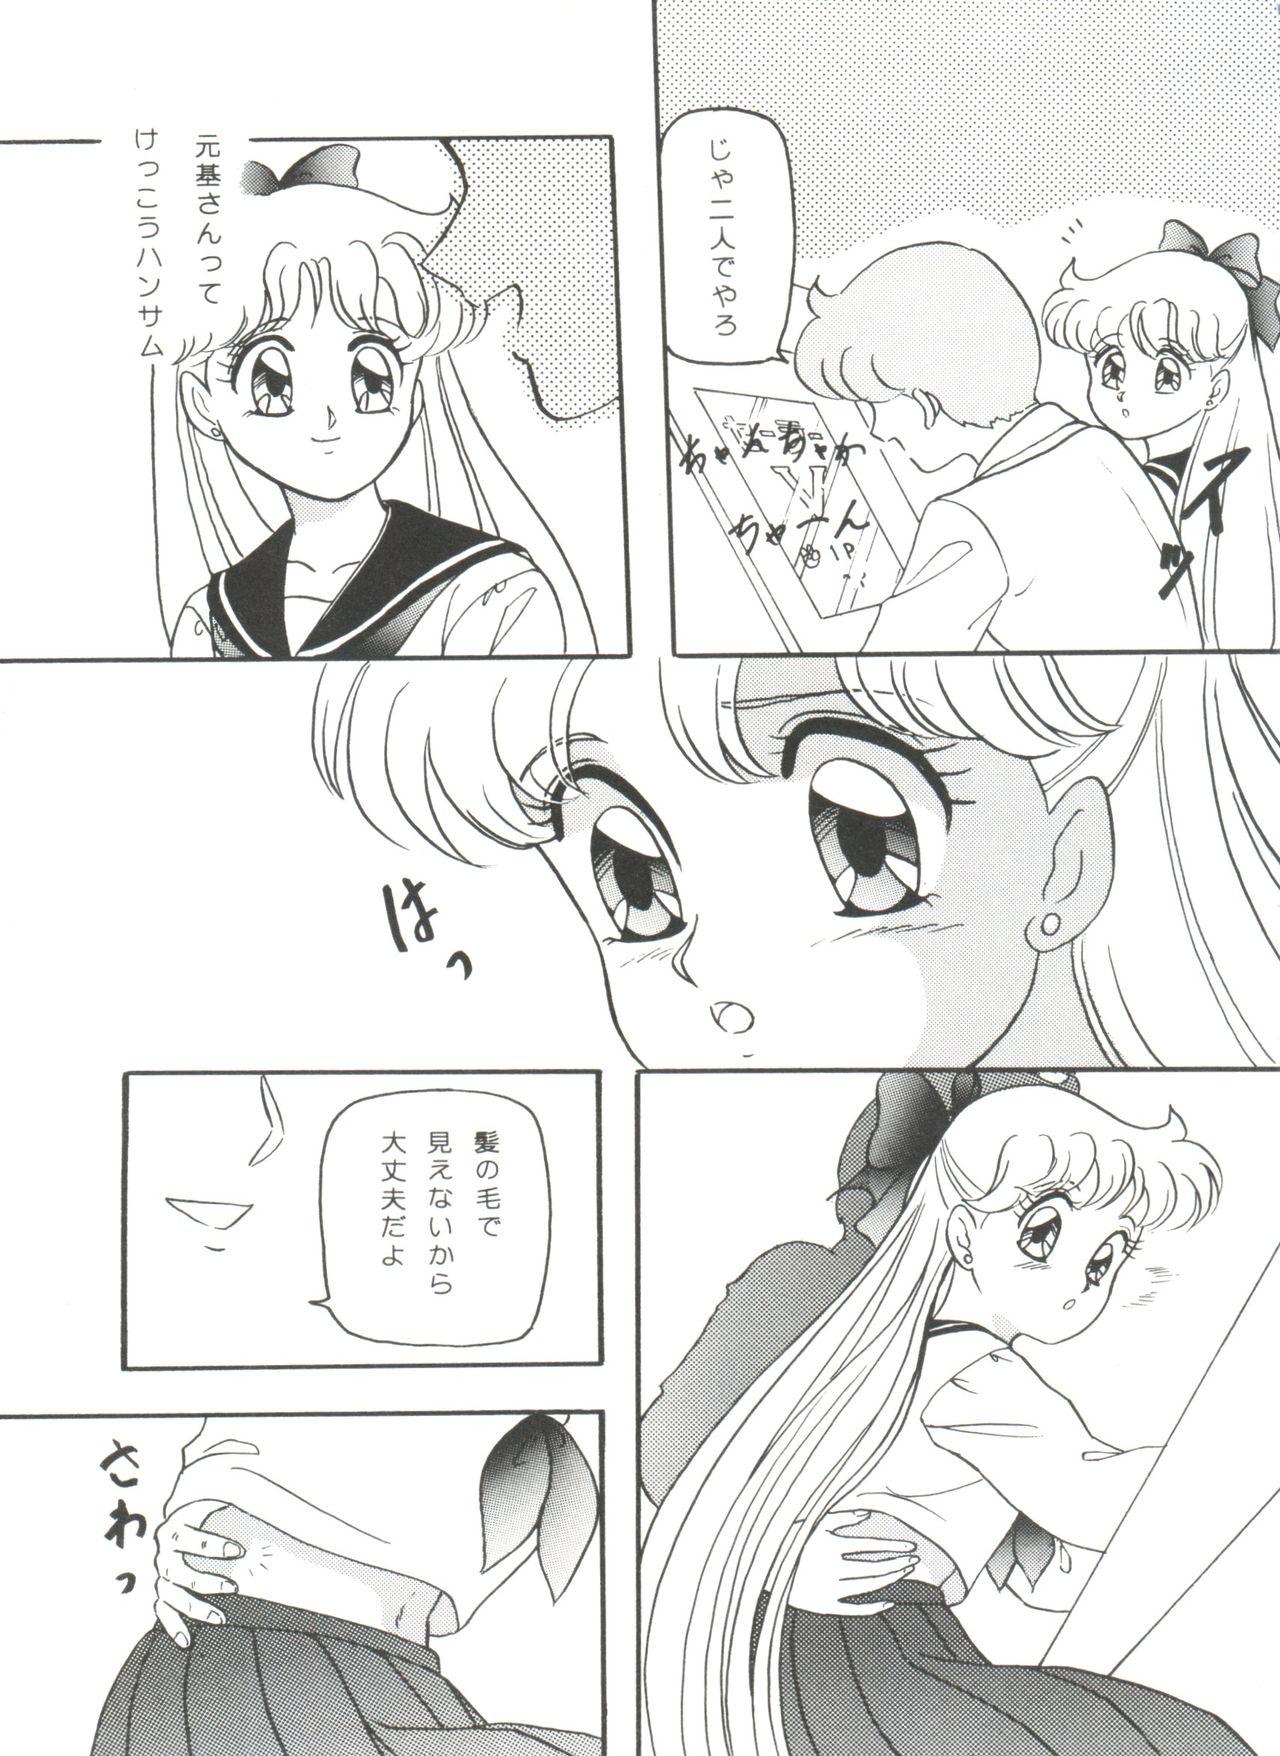 Cocksucker From the Moon - Sailor moon Asia - Page 7